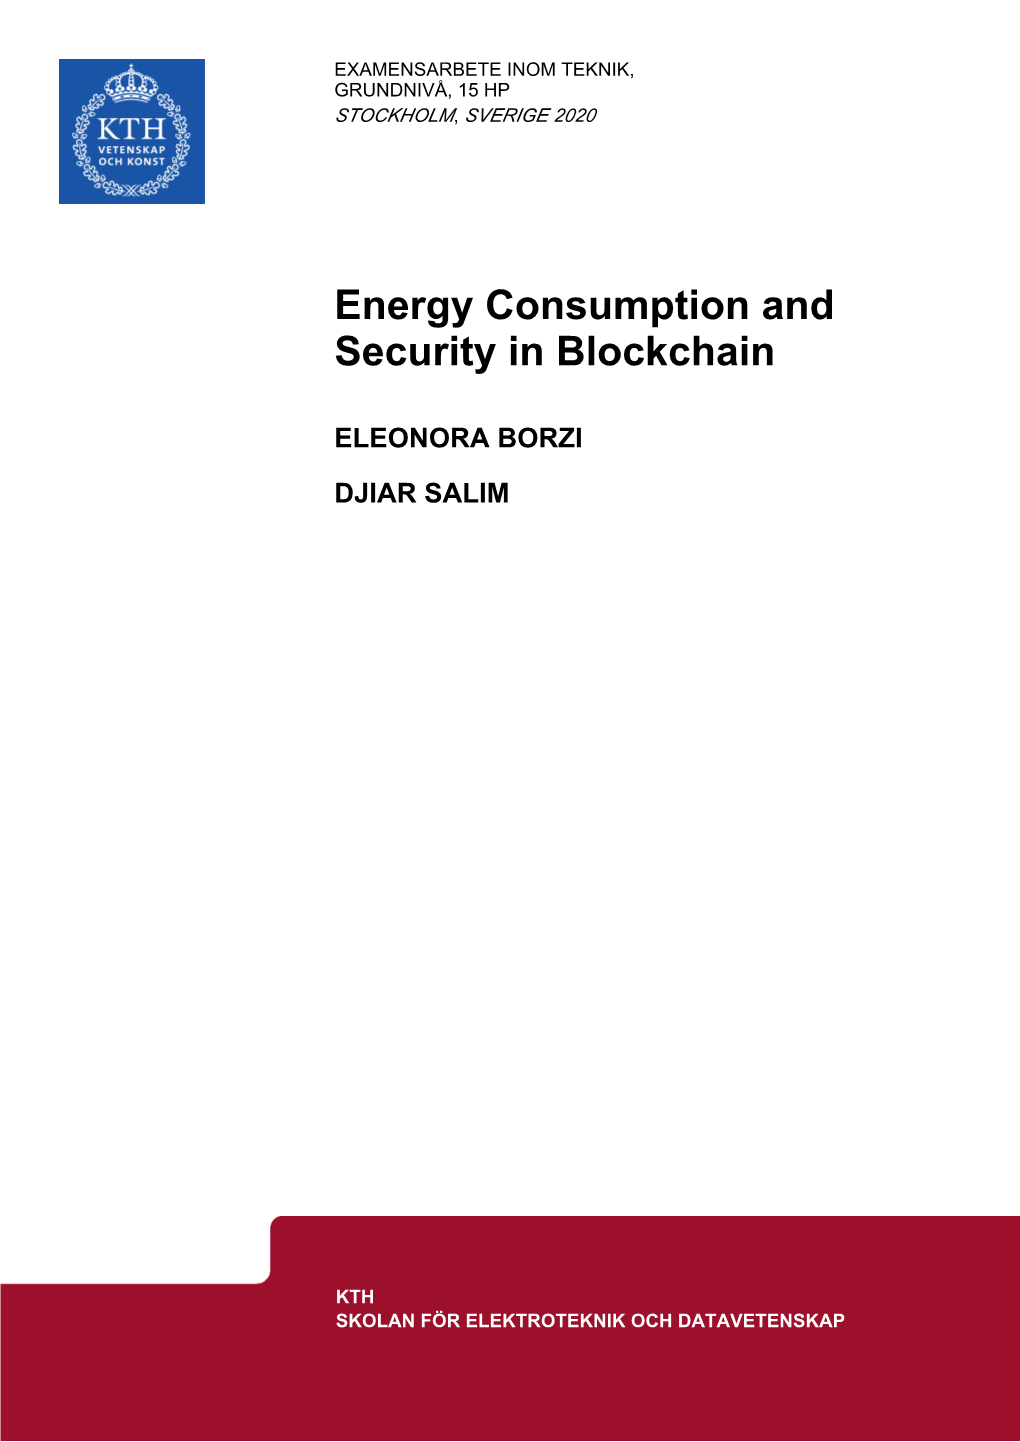 Energy Consumption and Security in Blockchain